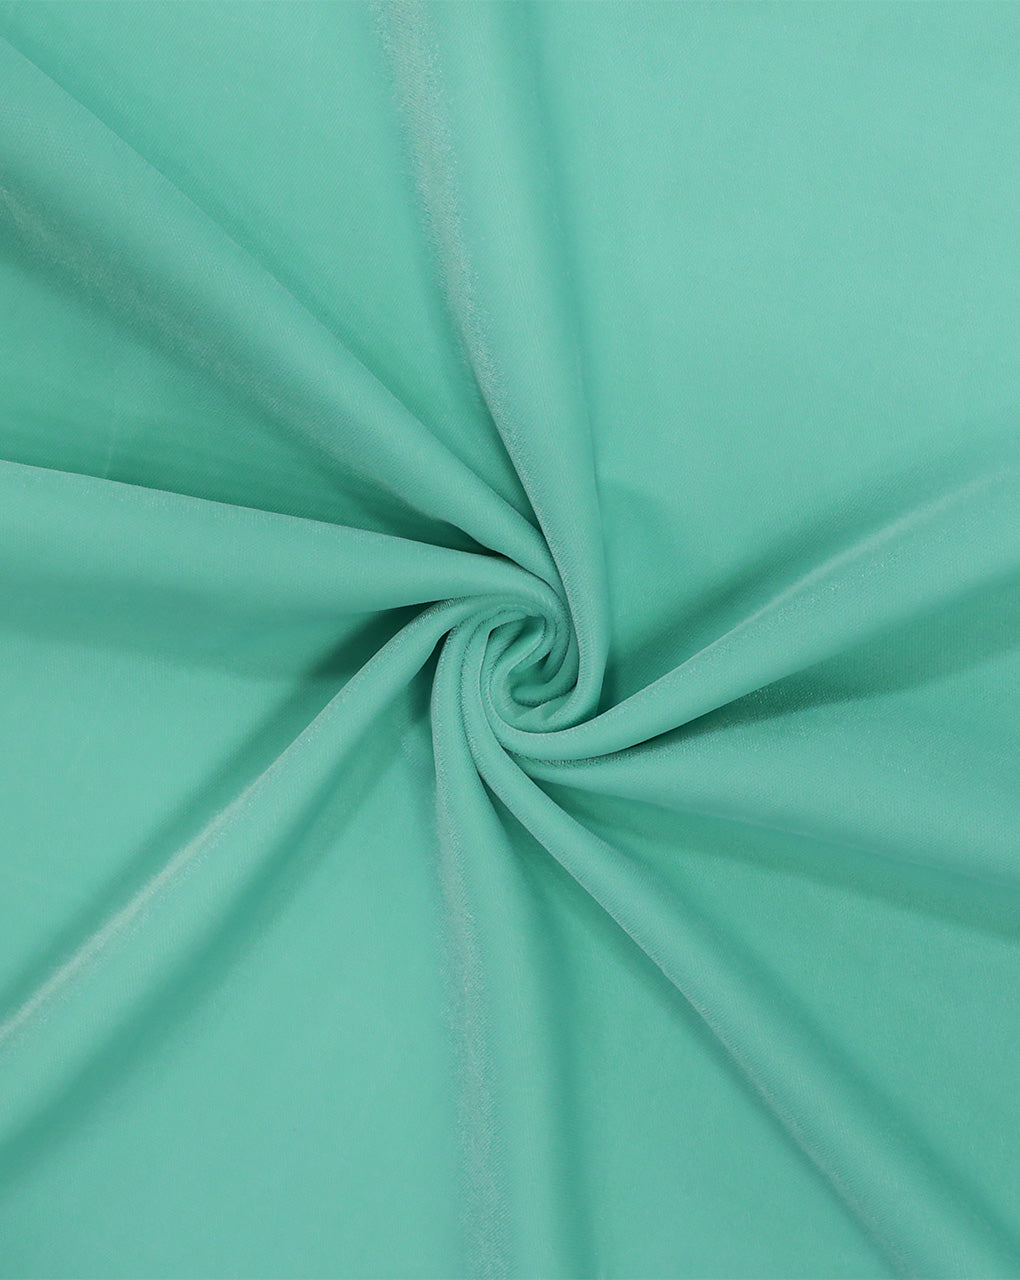 MINT GREEN PLAIN POLYESTER MICRO VELVET FABRIC ( WIDTH 58 INCHES )